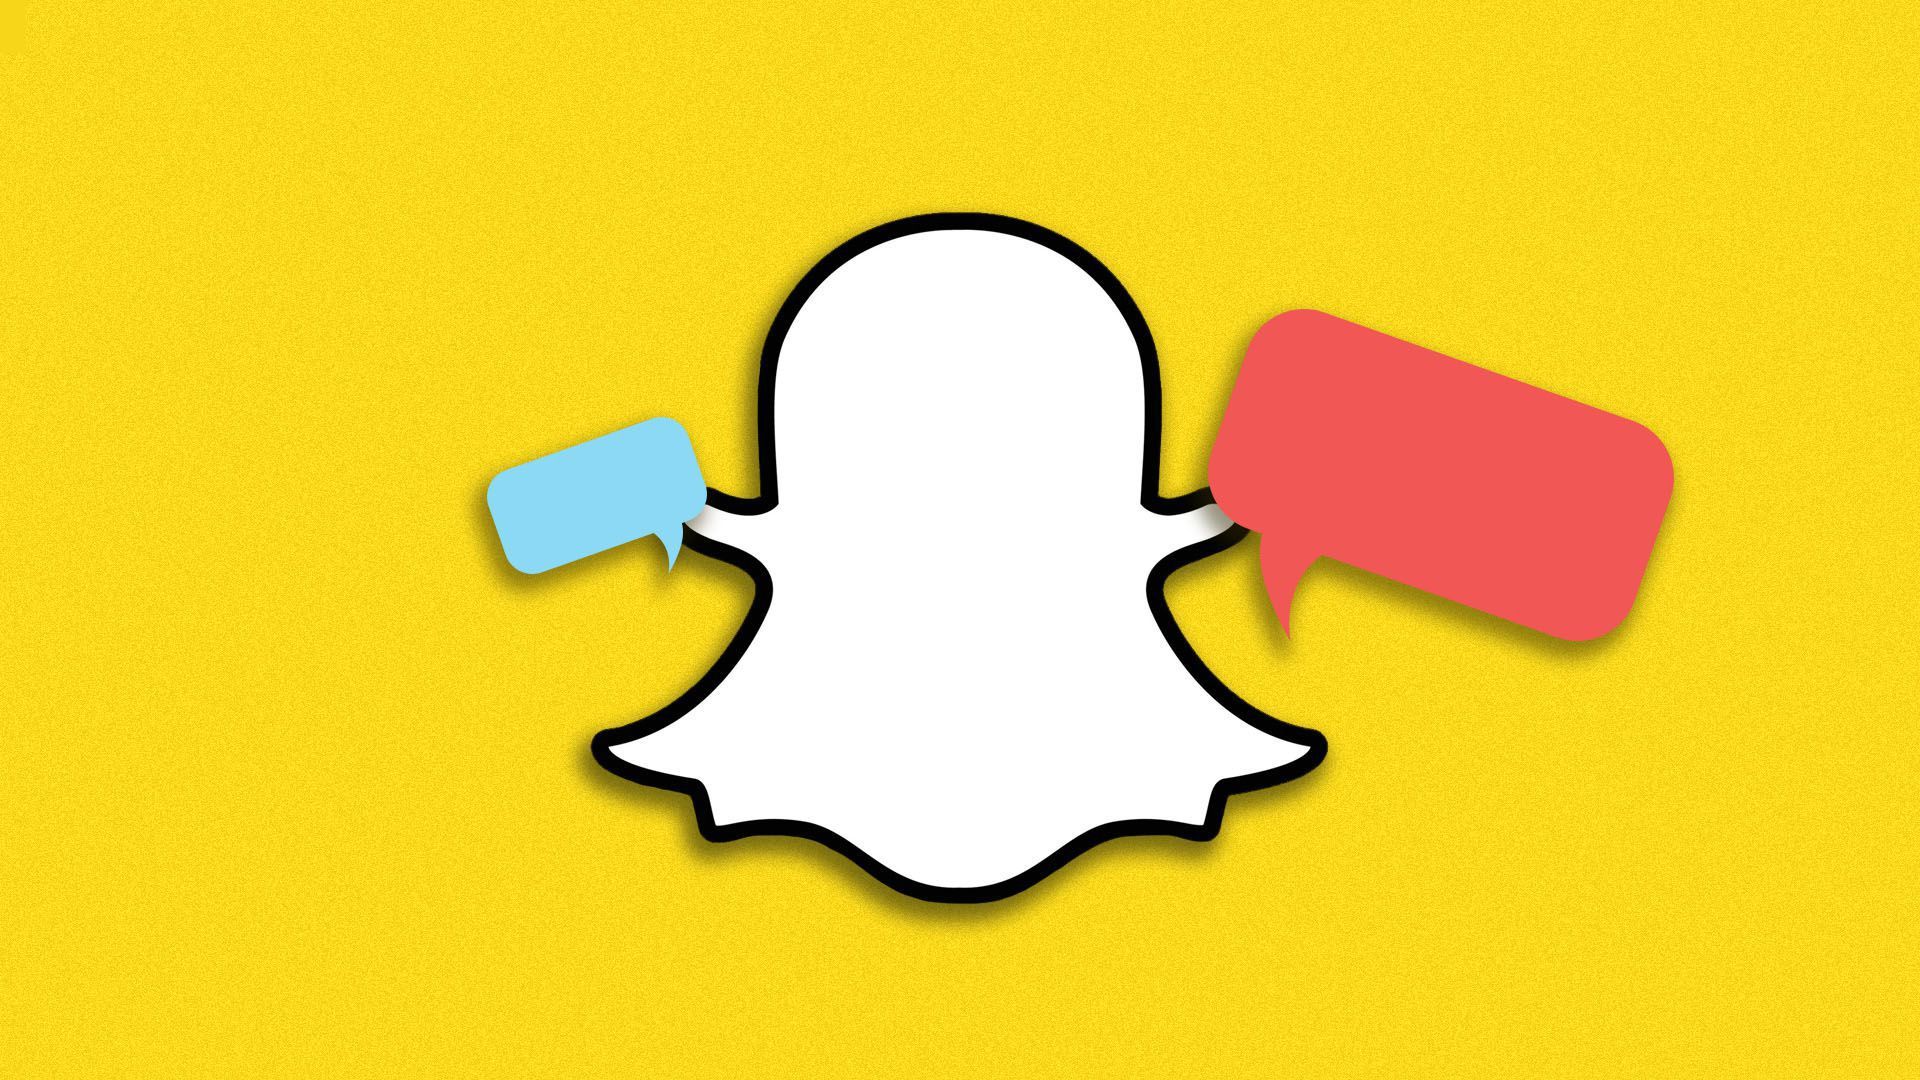 Illustration of Snapchat ghost holding speech bubbles